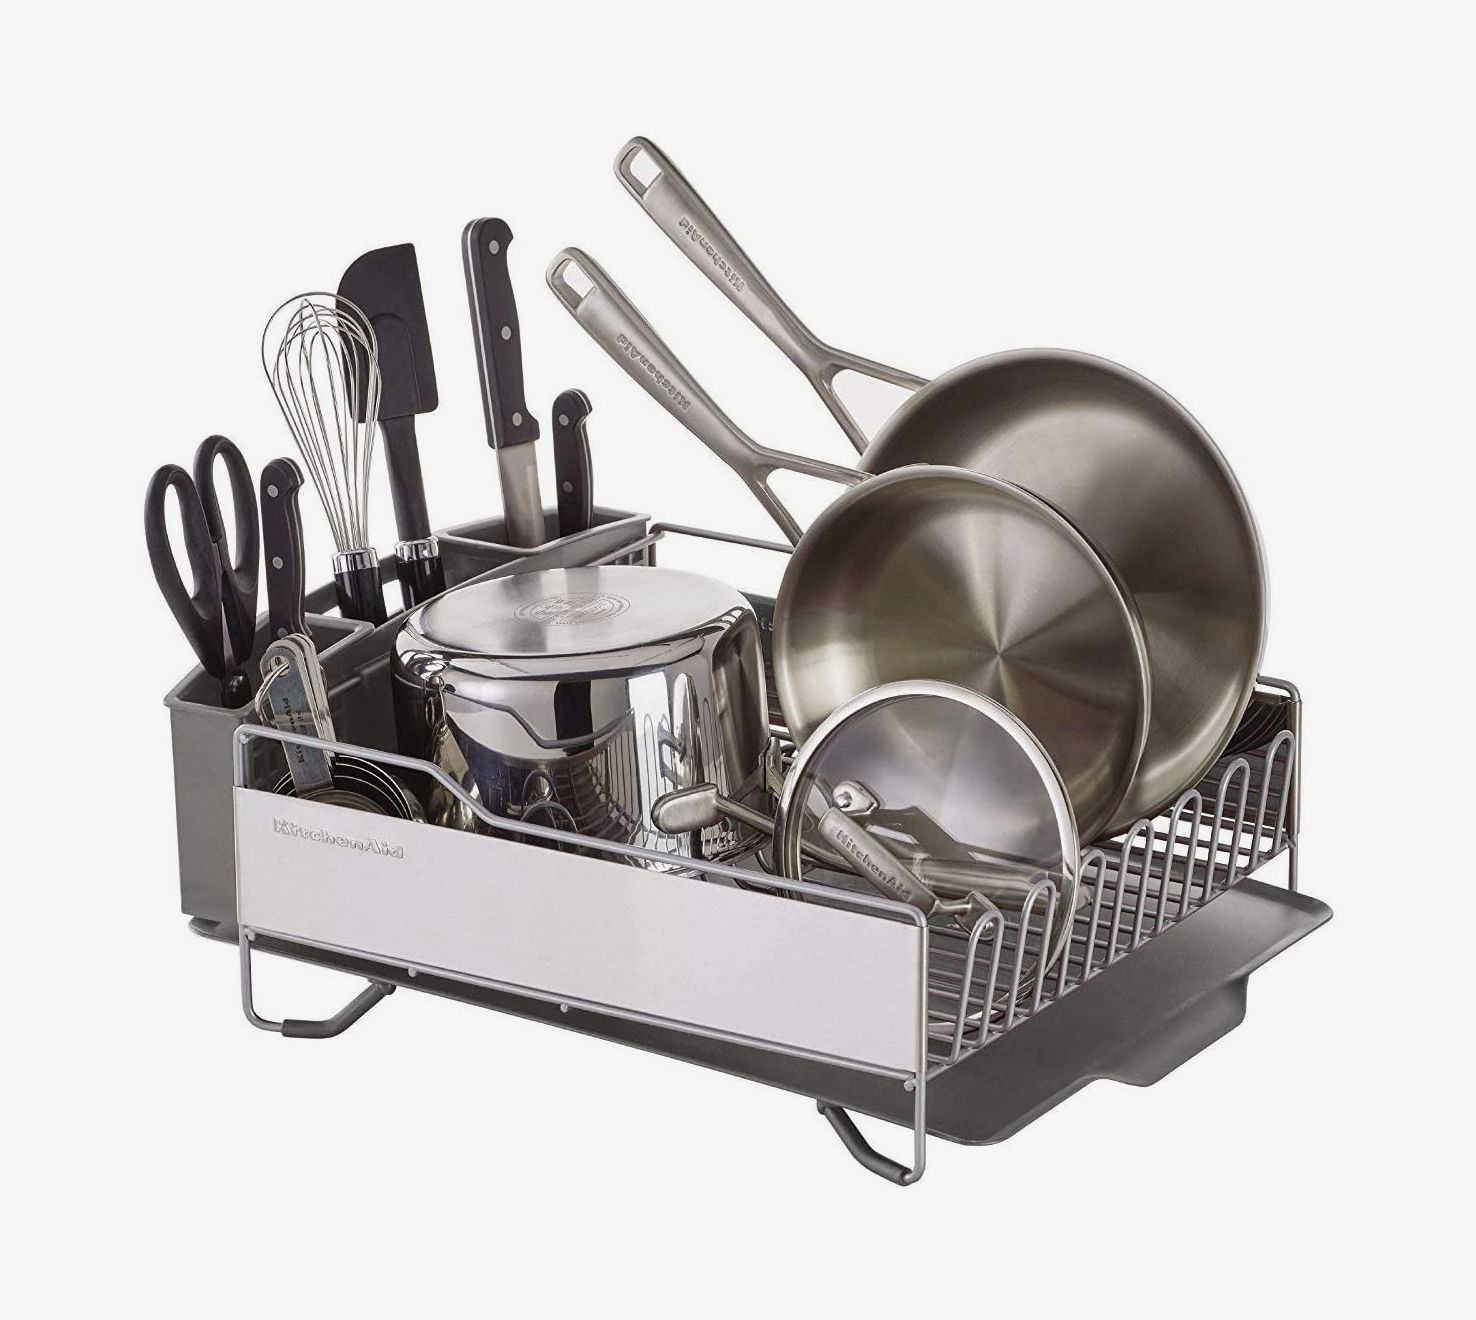 Clever Designs That Reinvent The Humble Dish Drying Rack